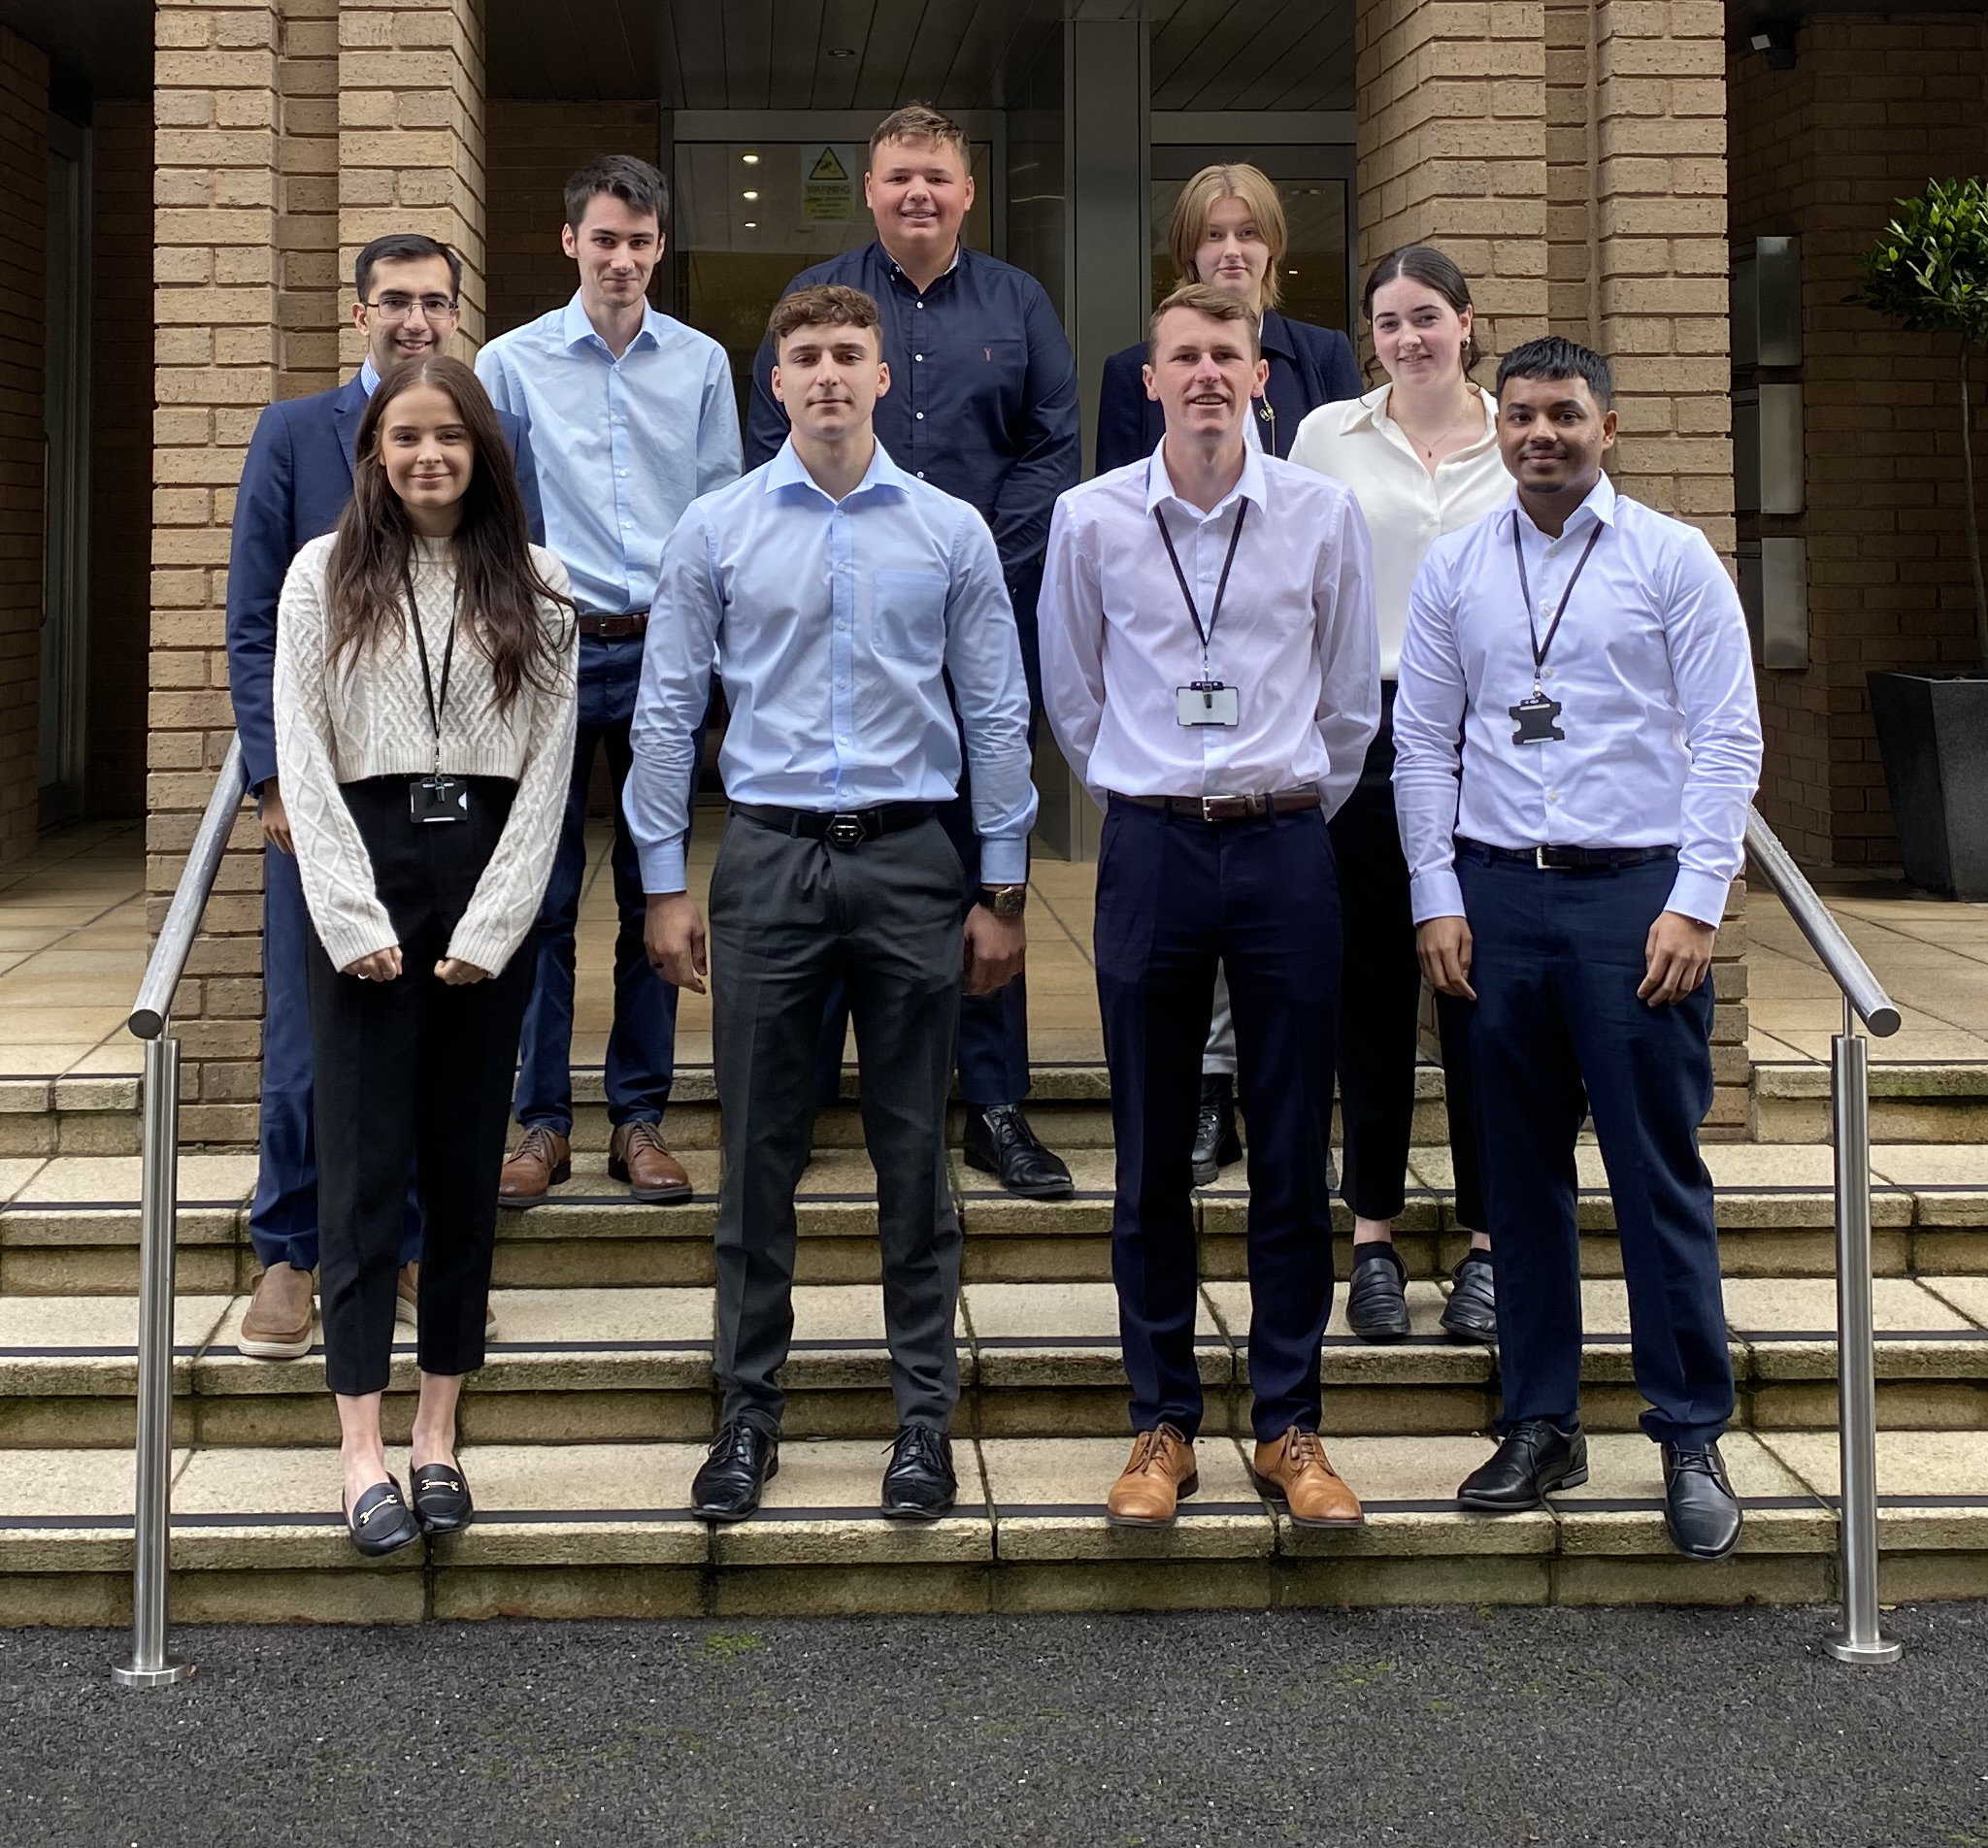 Nine new recruits at Saffery Champness Chartered Accountants in Bournemouth